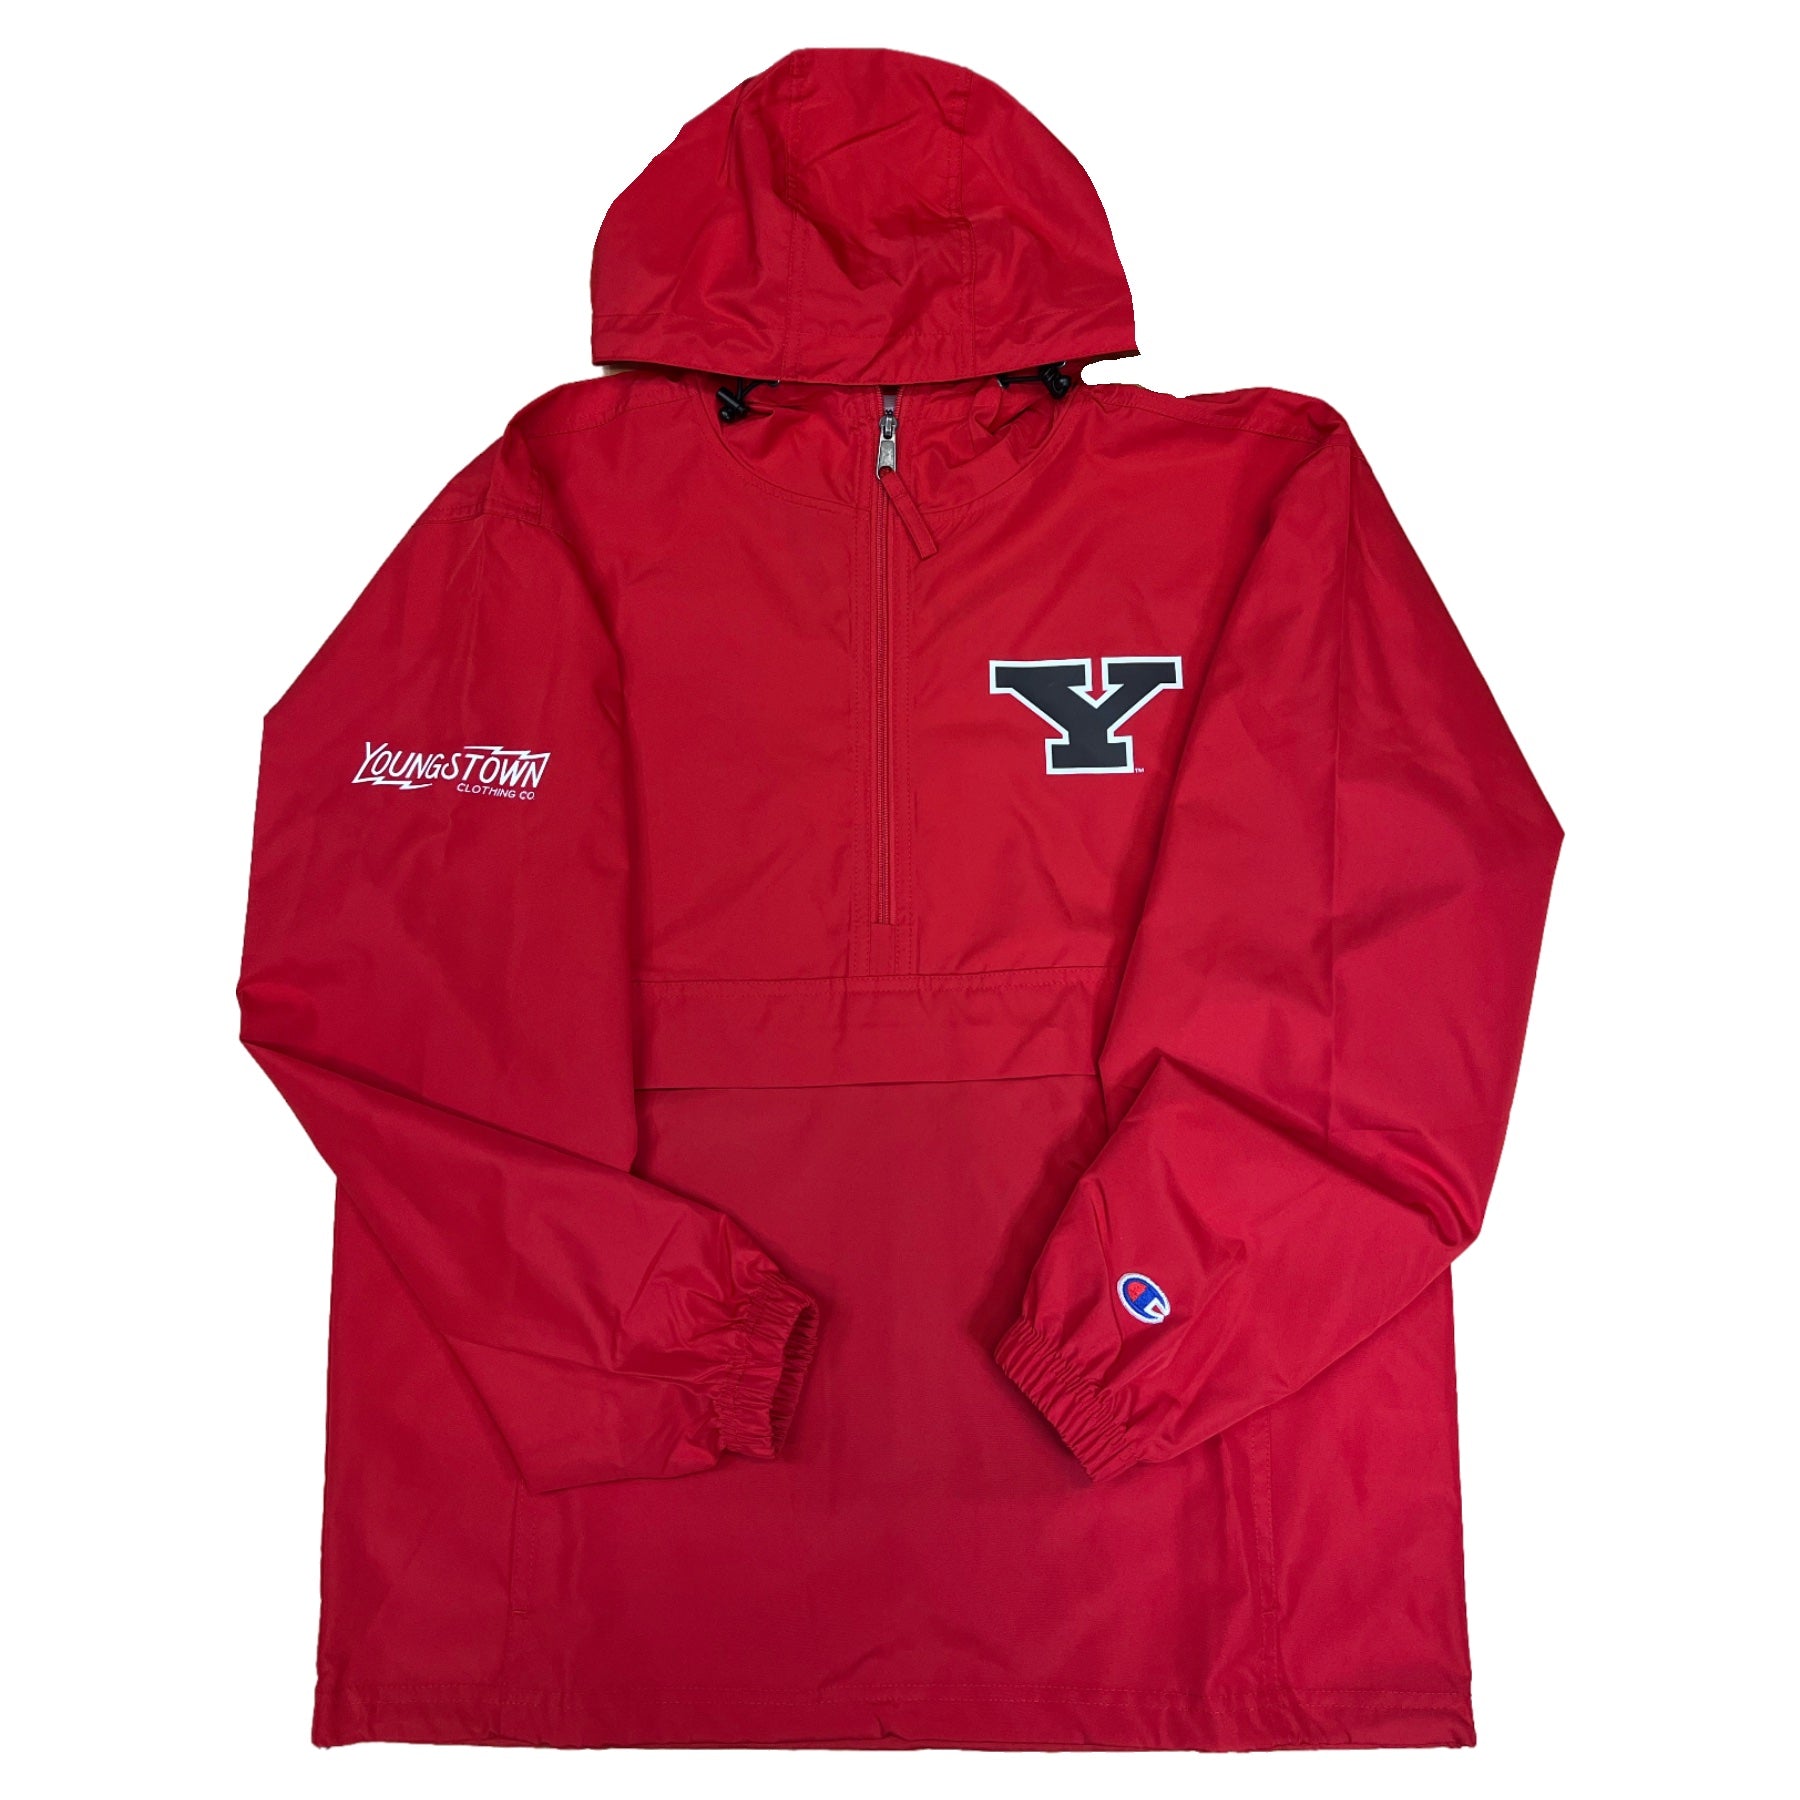 YSU Champion Anorak Jacket (Red) Youngstown Clothing Co